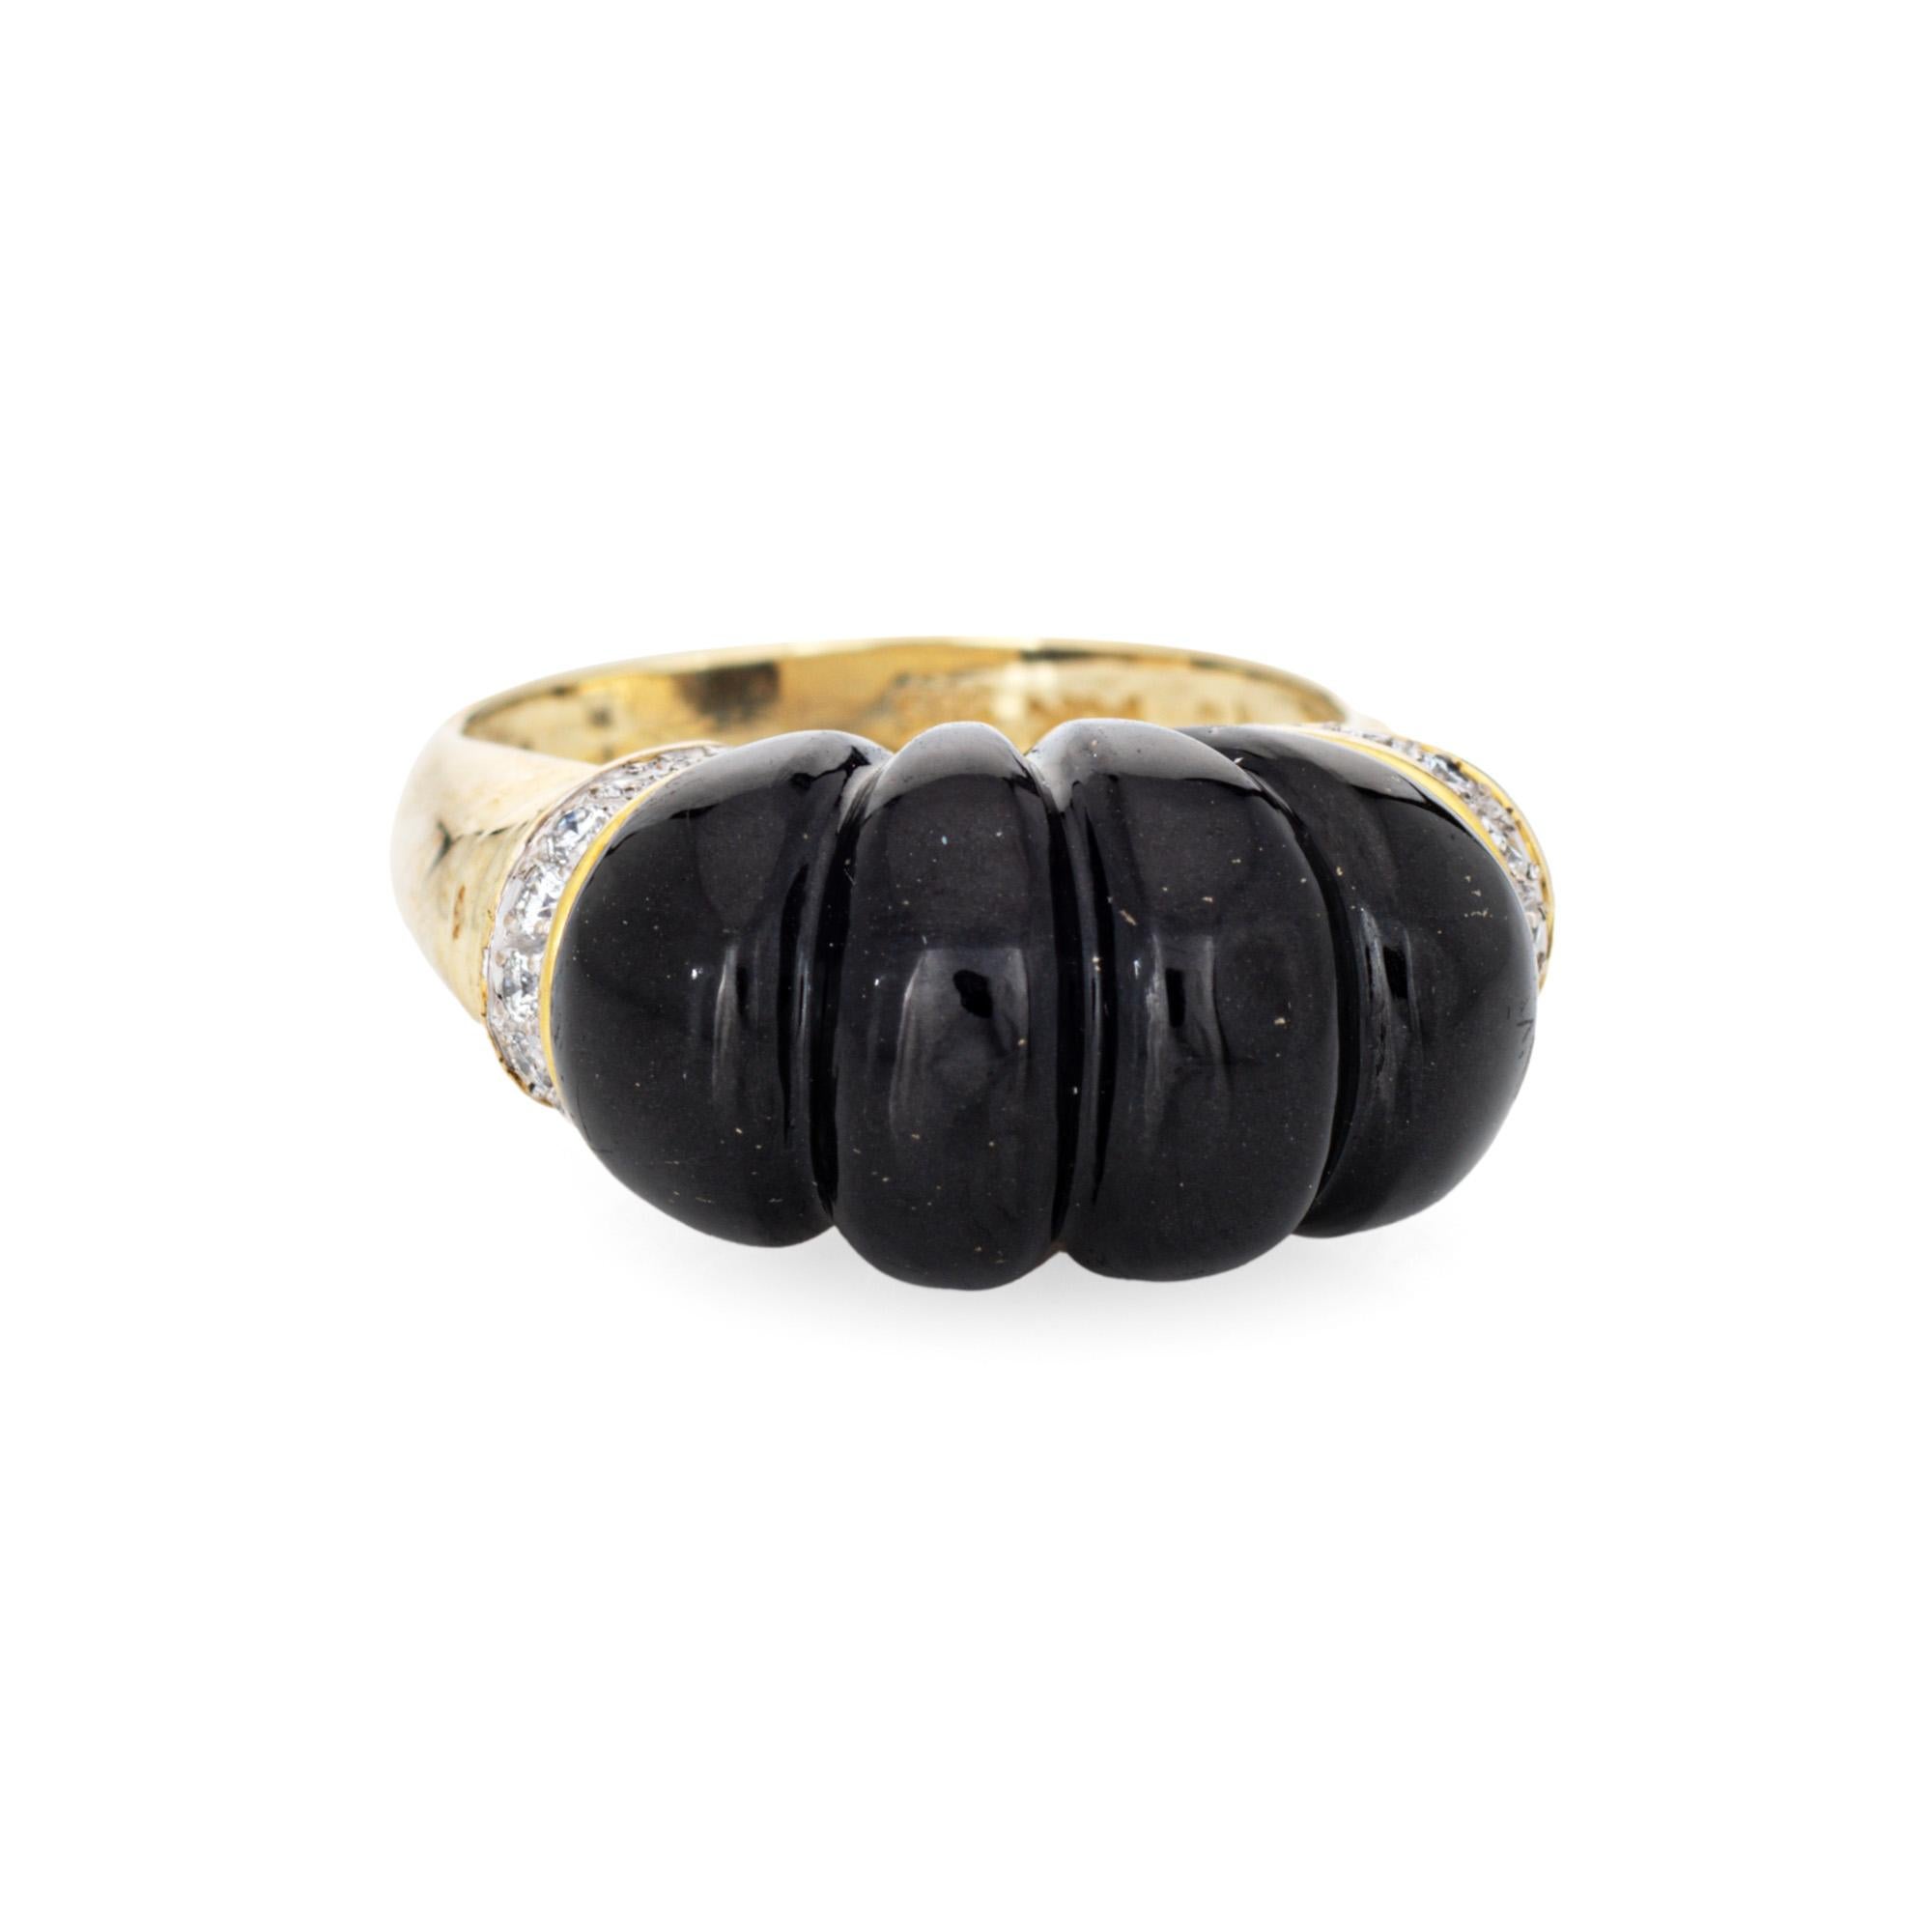 Stylish vintage fluted onyx & diamond ring (circa 1960s to 1970s) crafted in 14 karat yellow gold. 

Fluted onyx measures 17mm x 10.5mm. Diamonds total an estimated 0.10 carats (estimated at H-I color and SI2-I2 clarity). The onyx is in very good